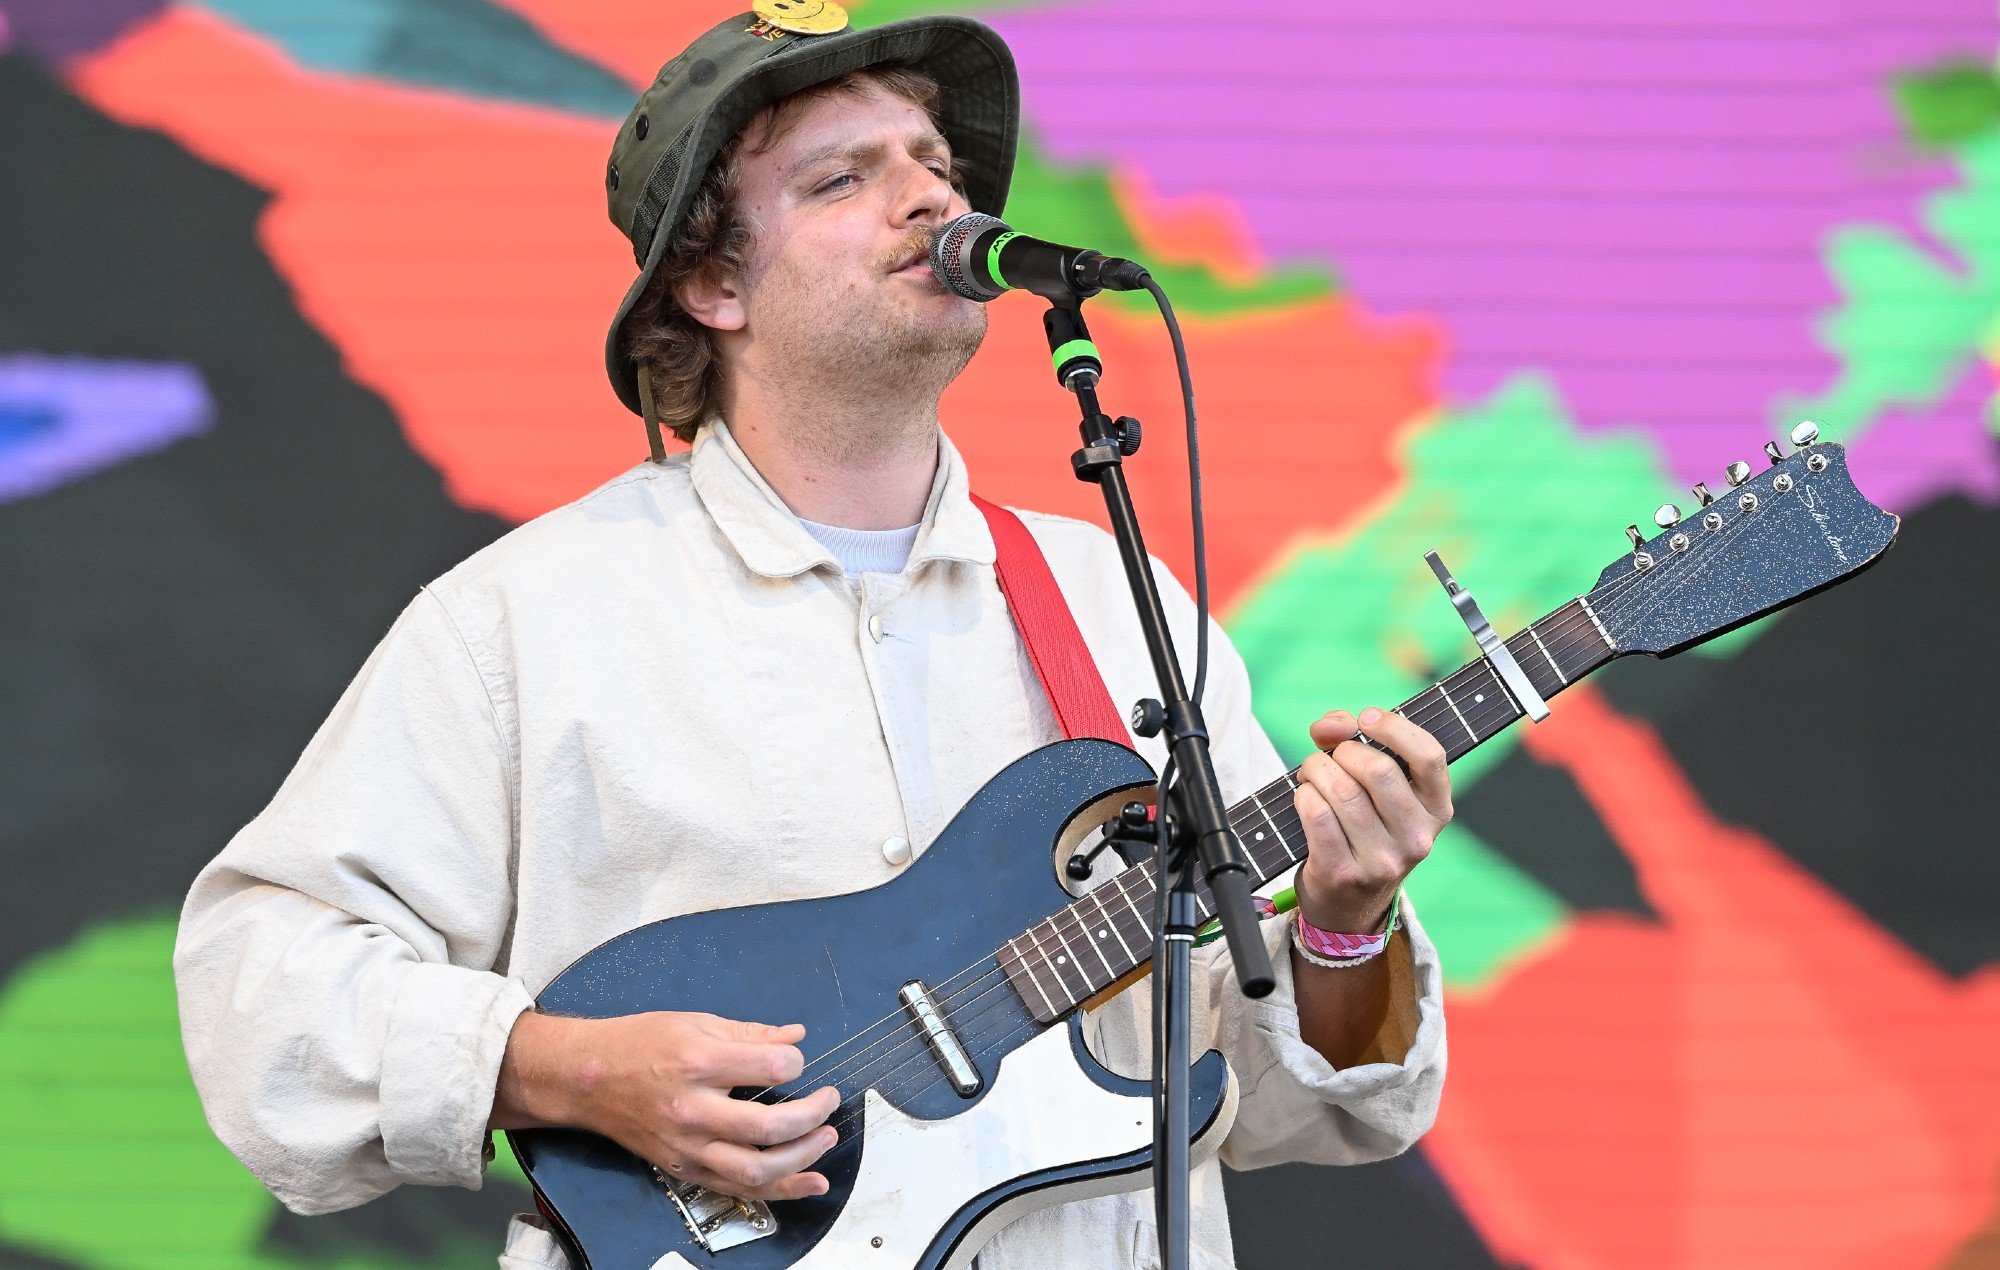 Mac DeMarco on why he hates guitar pedals